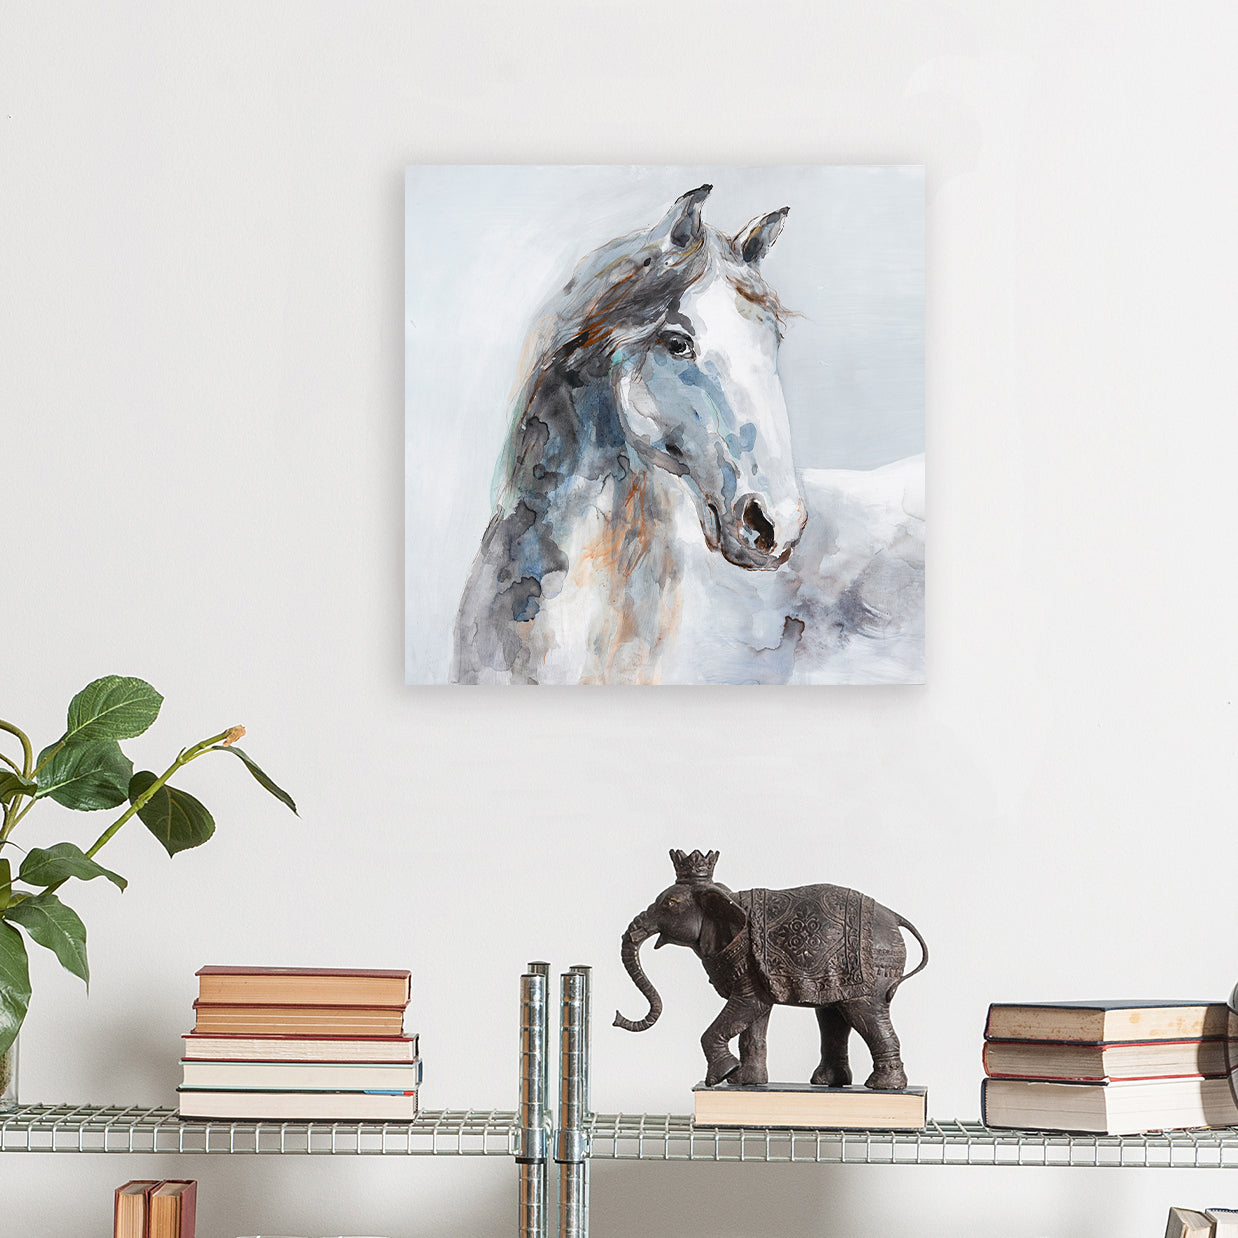 White horse of modern art - Oil Painting on Wrapped Canvas Wall Art.